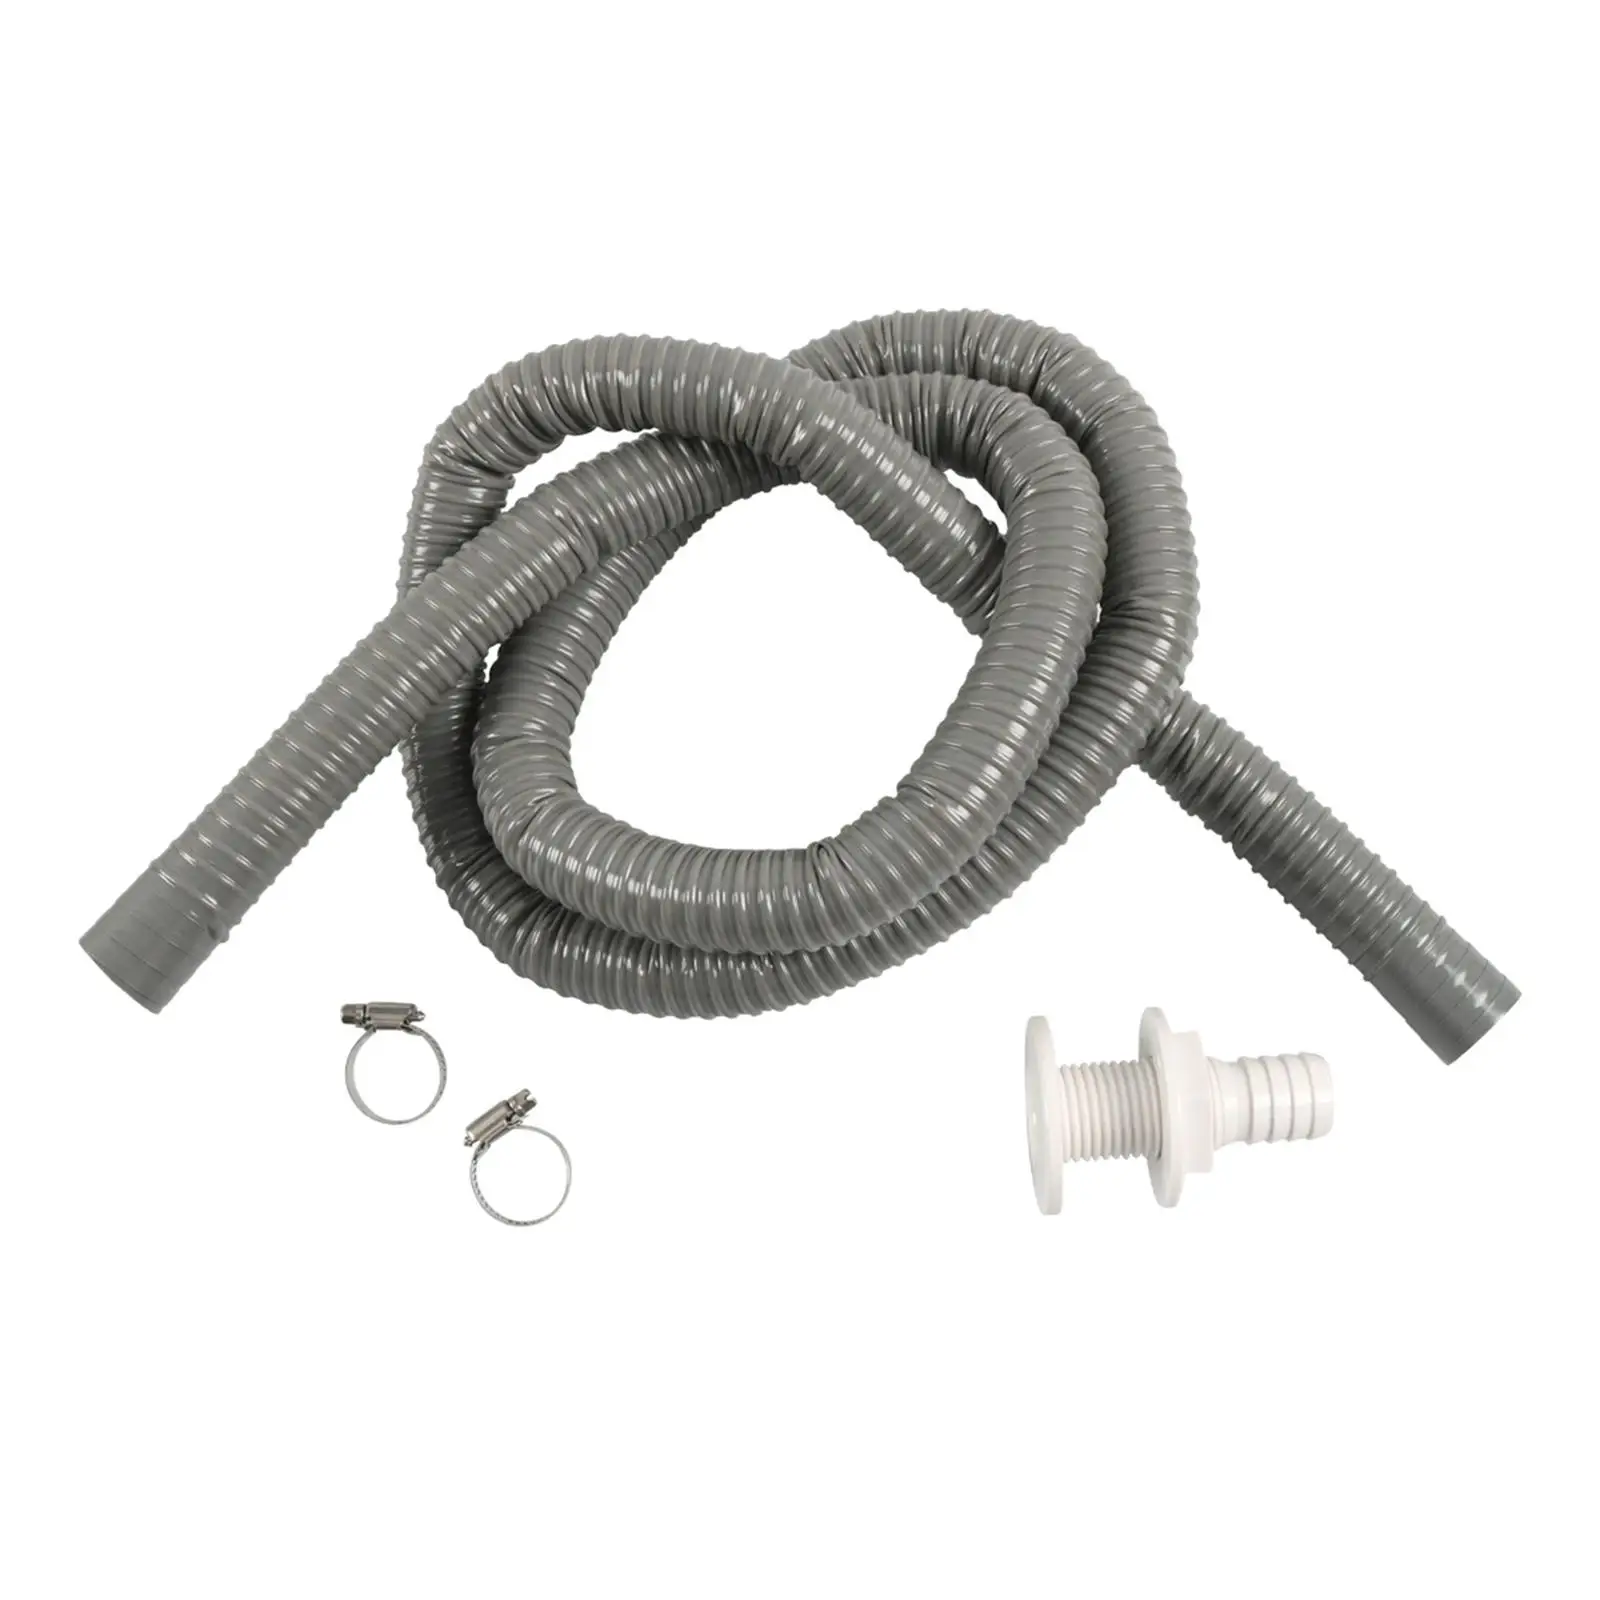 Marine Hose Bilge Pump Installation with 2 Hose Clamps and thru Hull Fitting Kink Free Flexible 6 Feet Hose for Boats